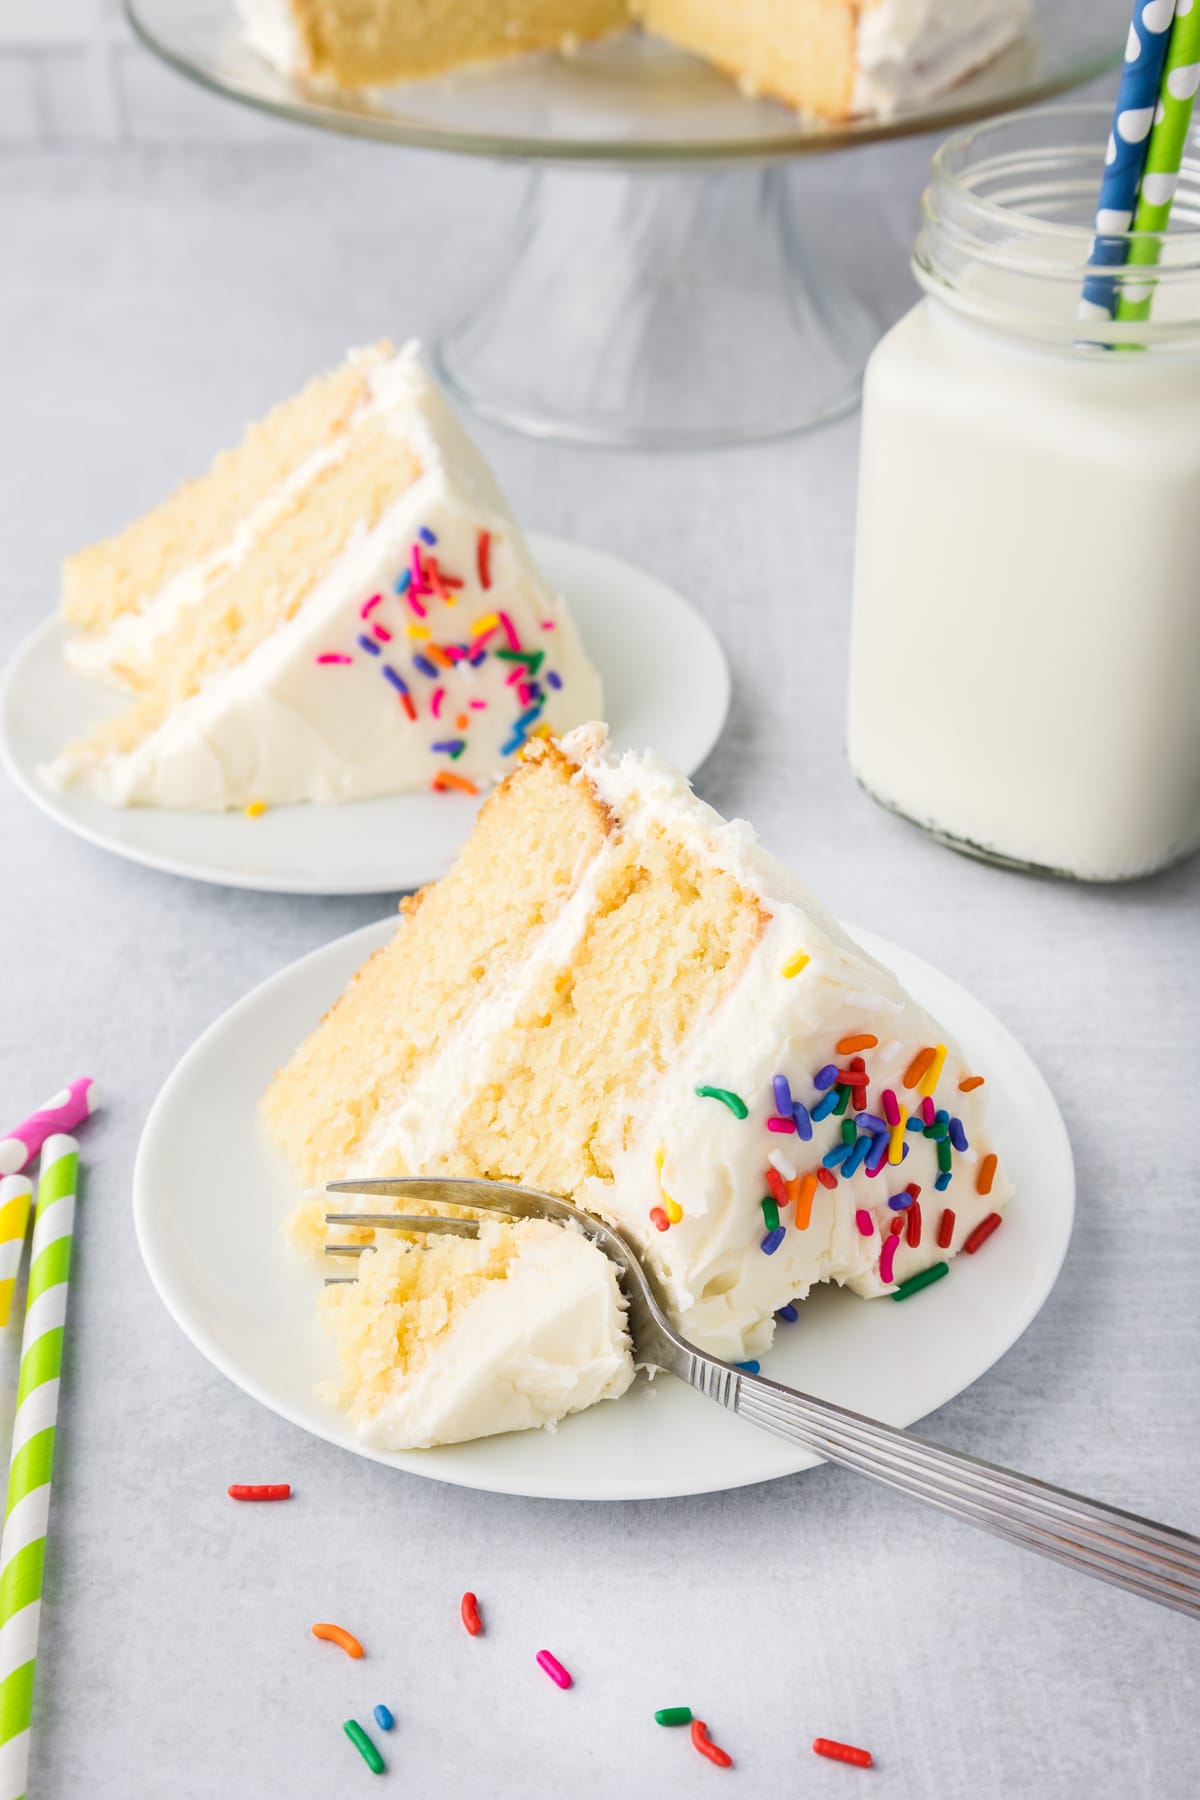 A fork cutting into a slice of vanilla cake